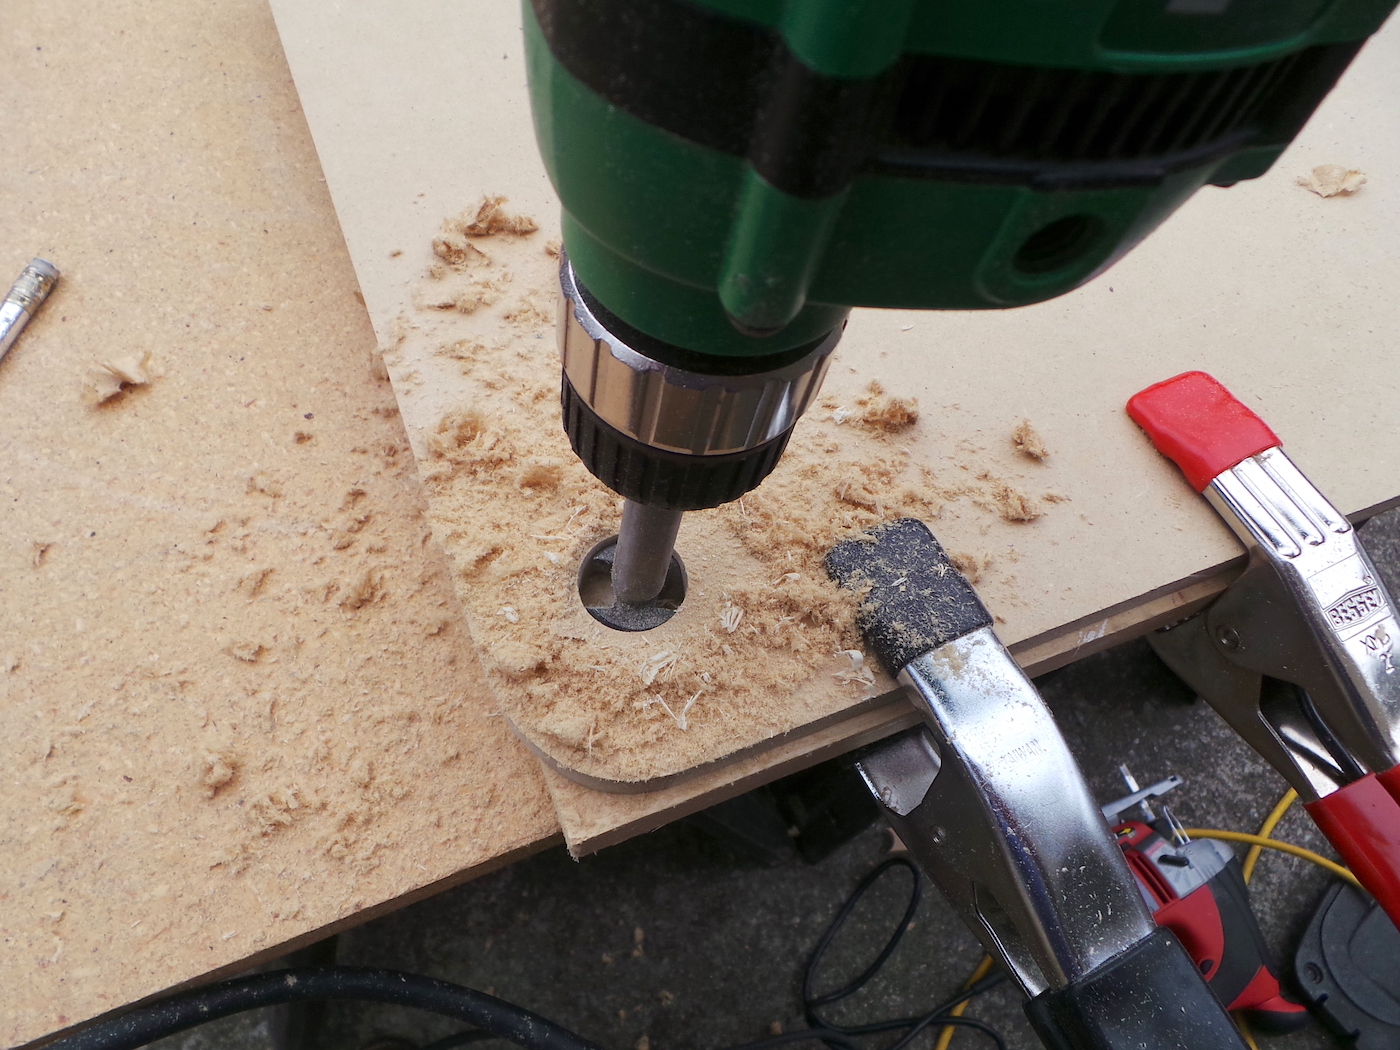 Drilling a hole into MDF with a one inch drill bit